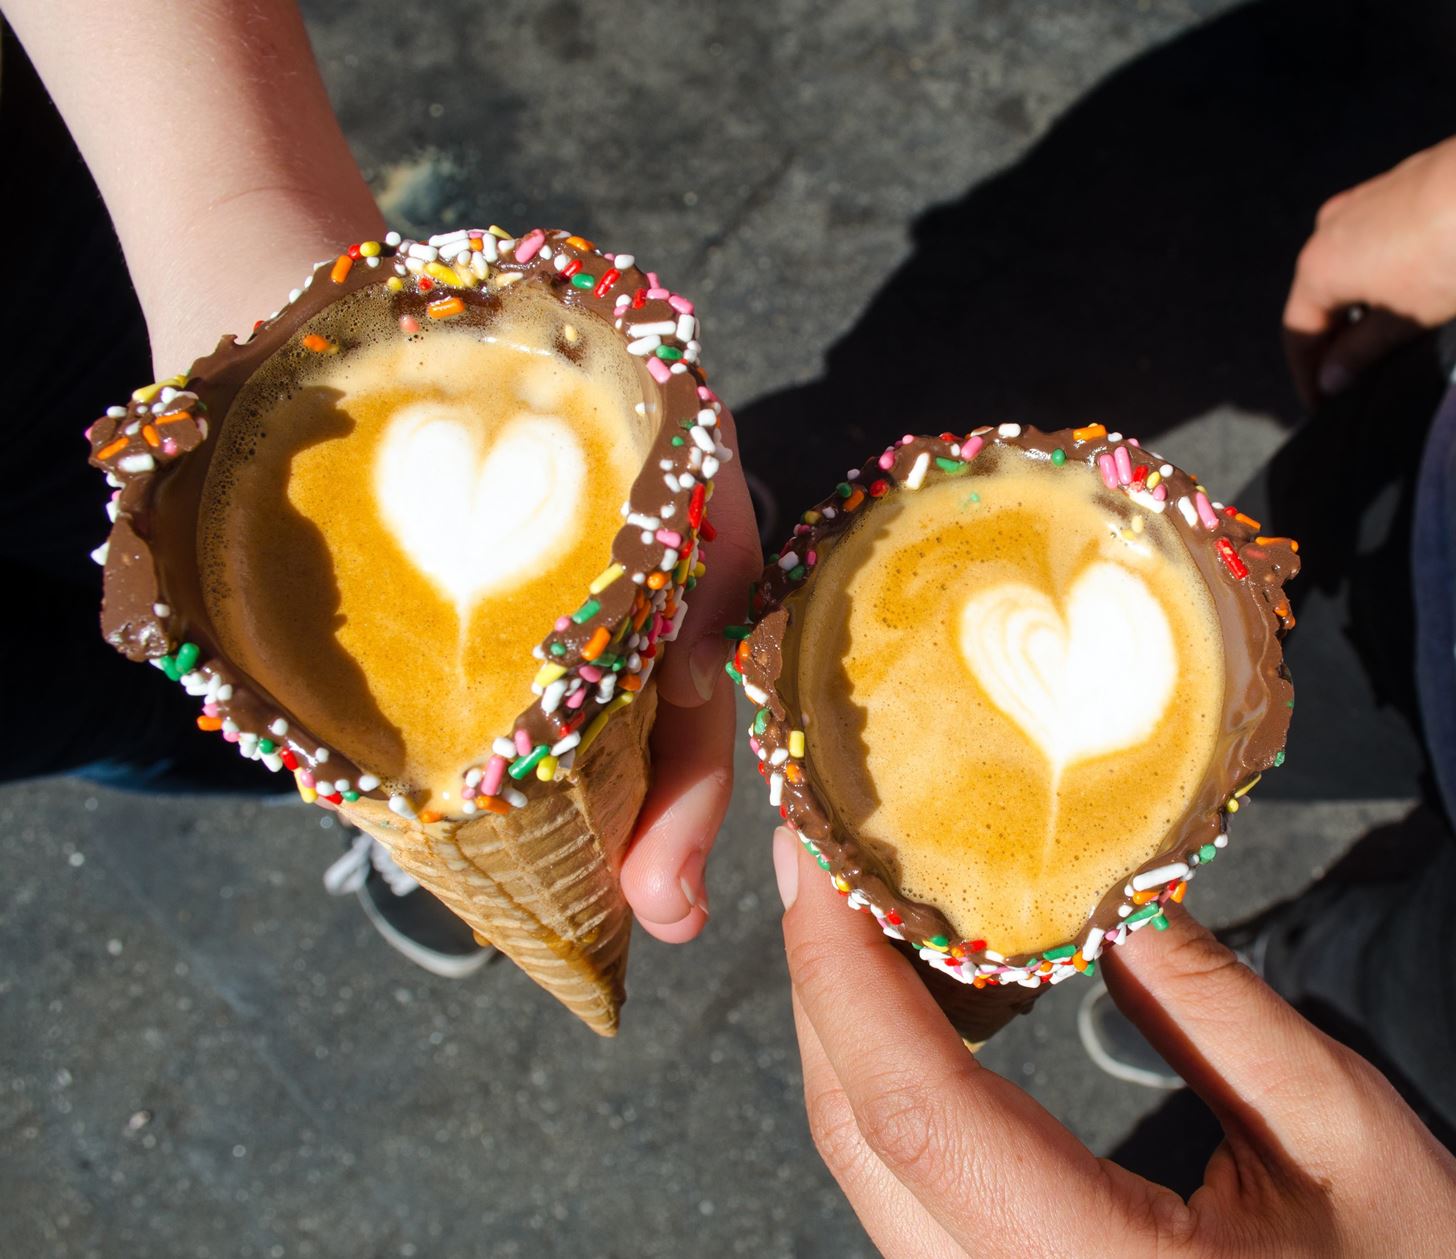 Finally—Impress Your Friends with Espresso in a Cone